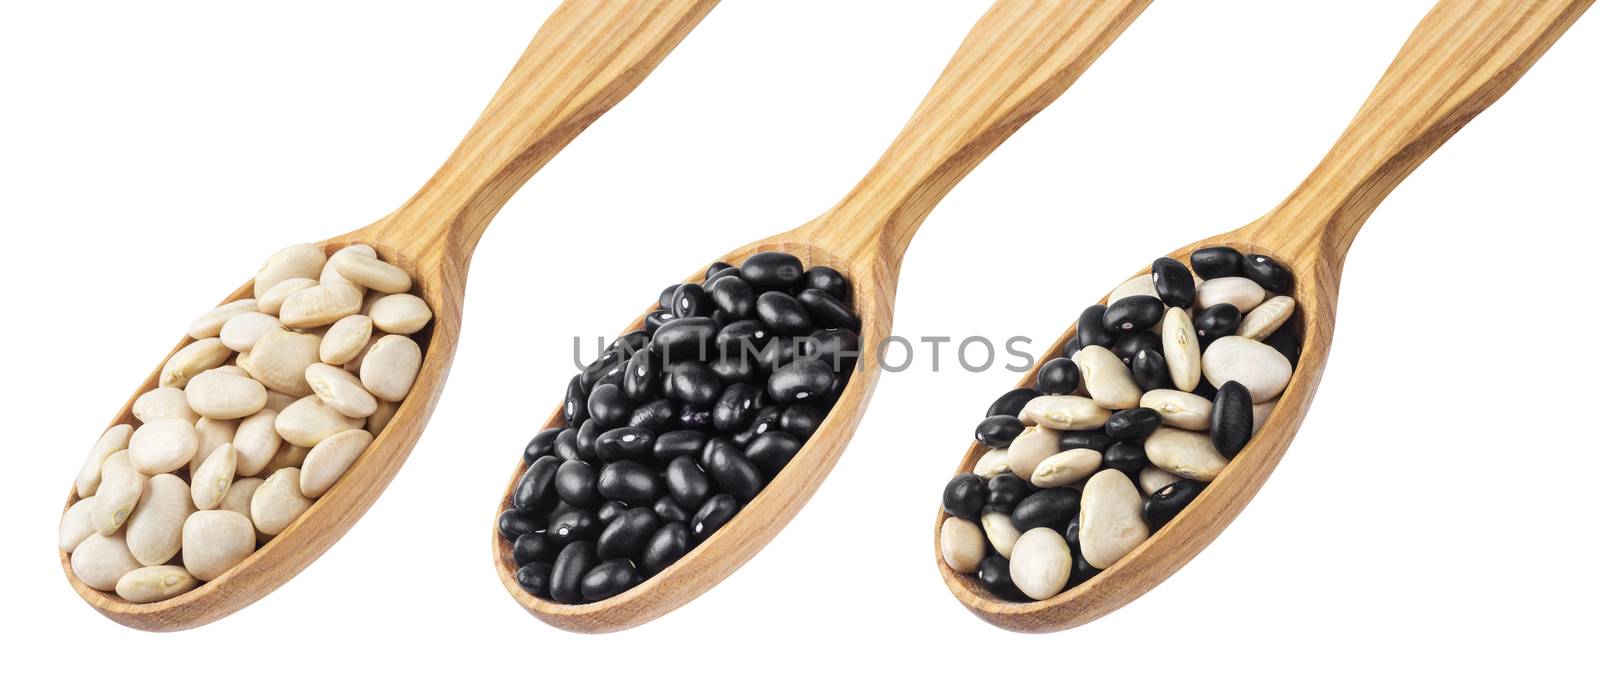 Beans in wooden spoon isolated on white background, collection by xamtiw